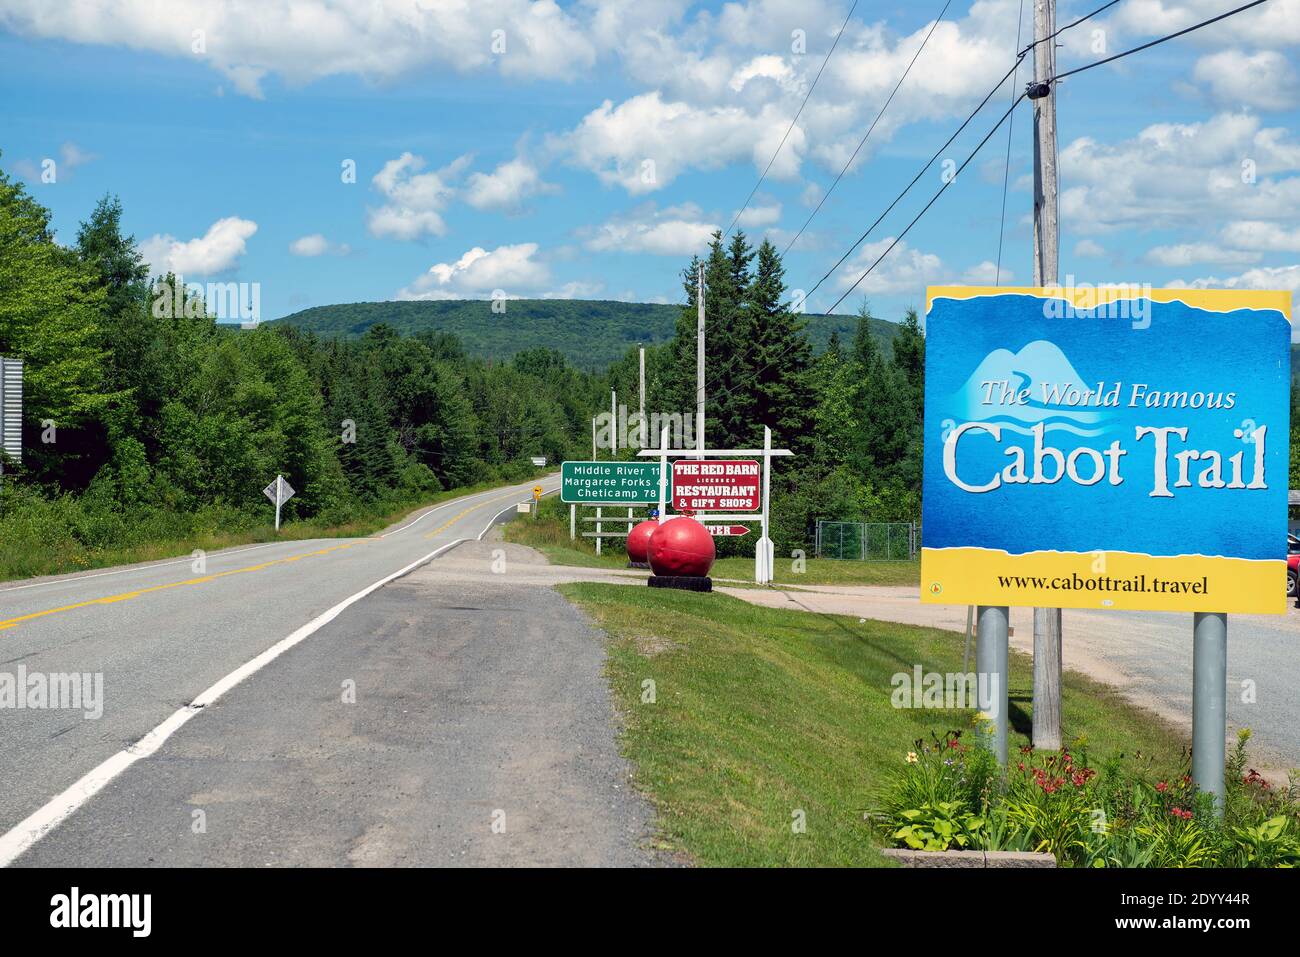 Baddeck, Canada - August 8, 2016:  Sign for world famous Cabot Trail in Cape Breton, Nova Scotia shows two different options of travelling around the Stock Photo